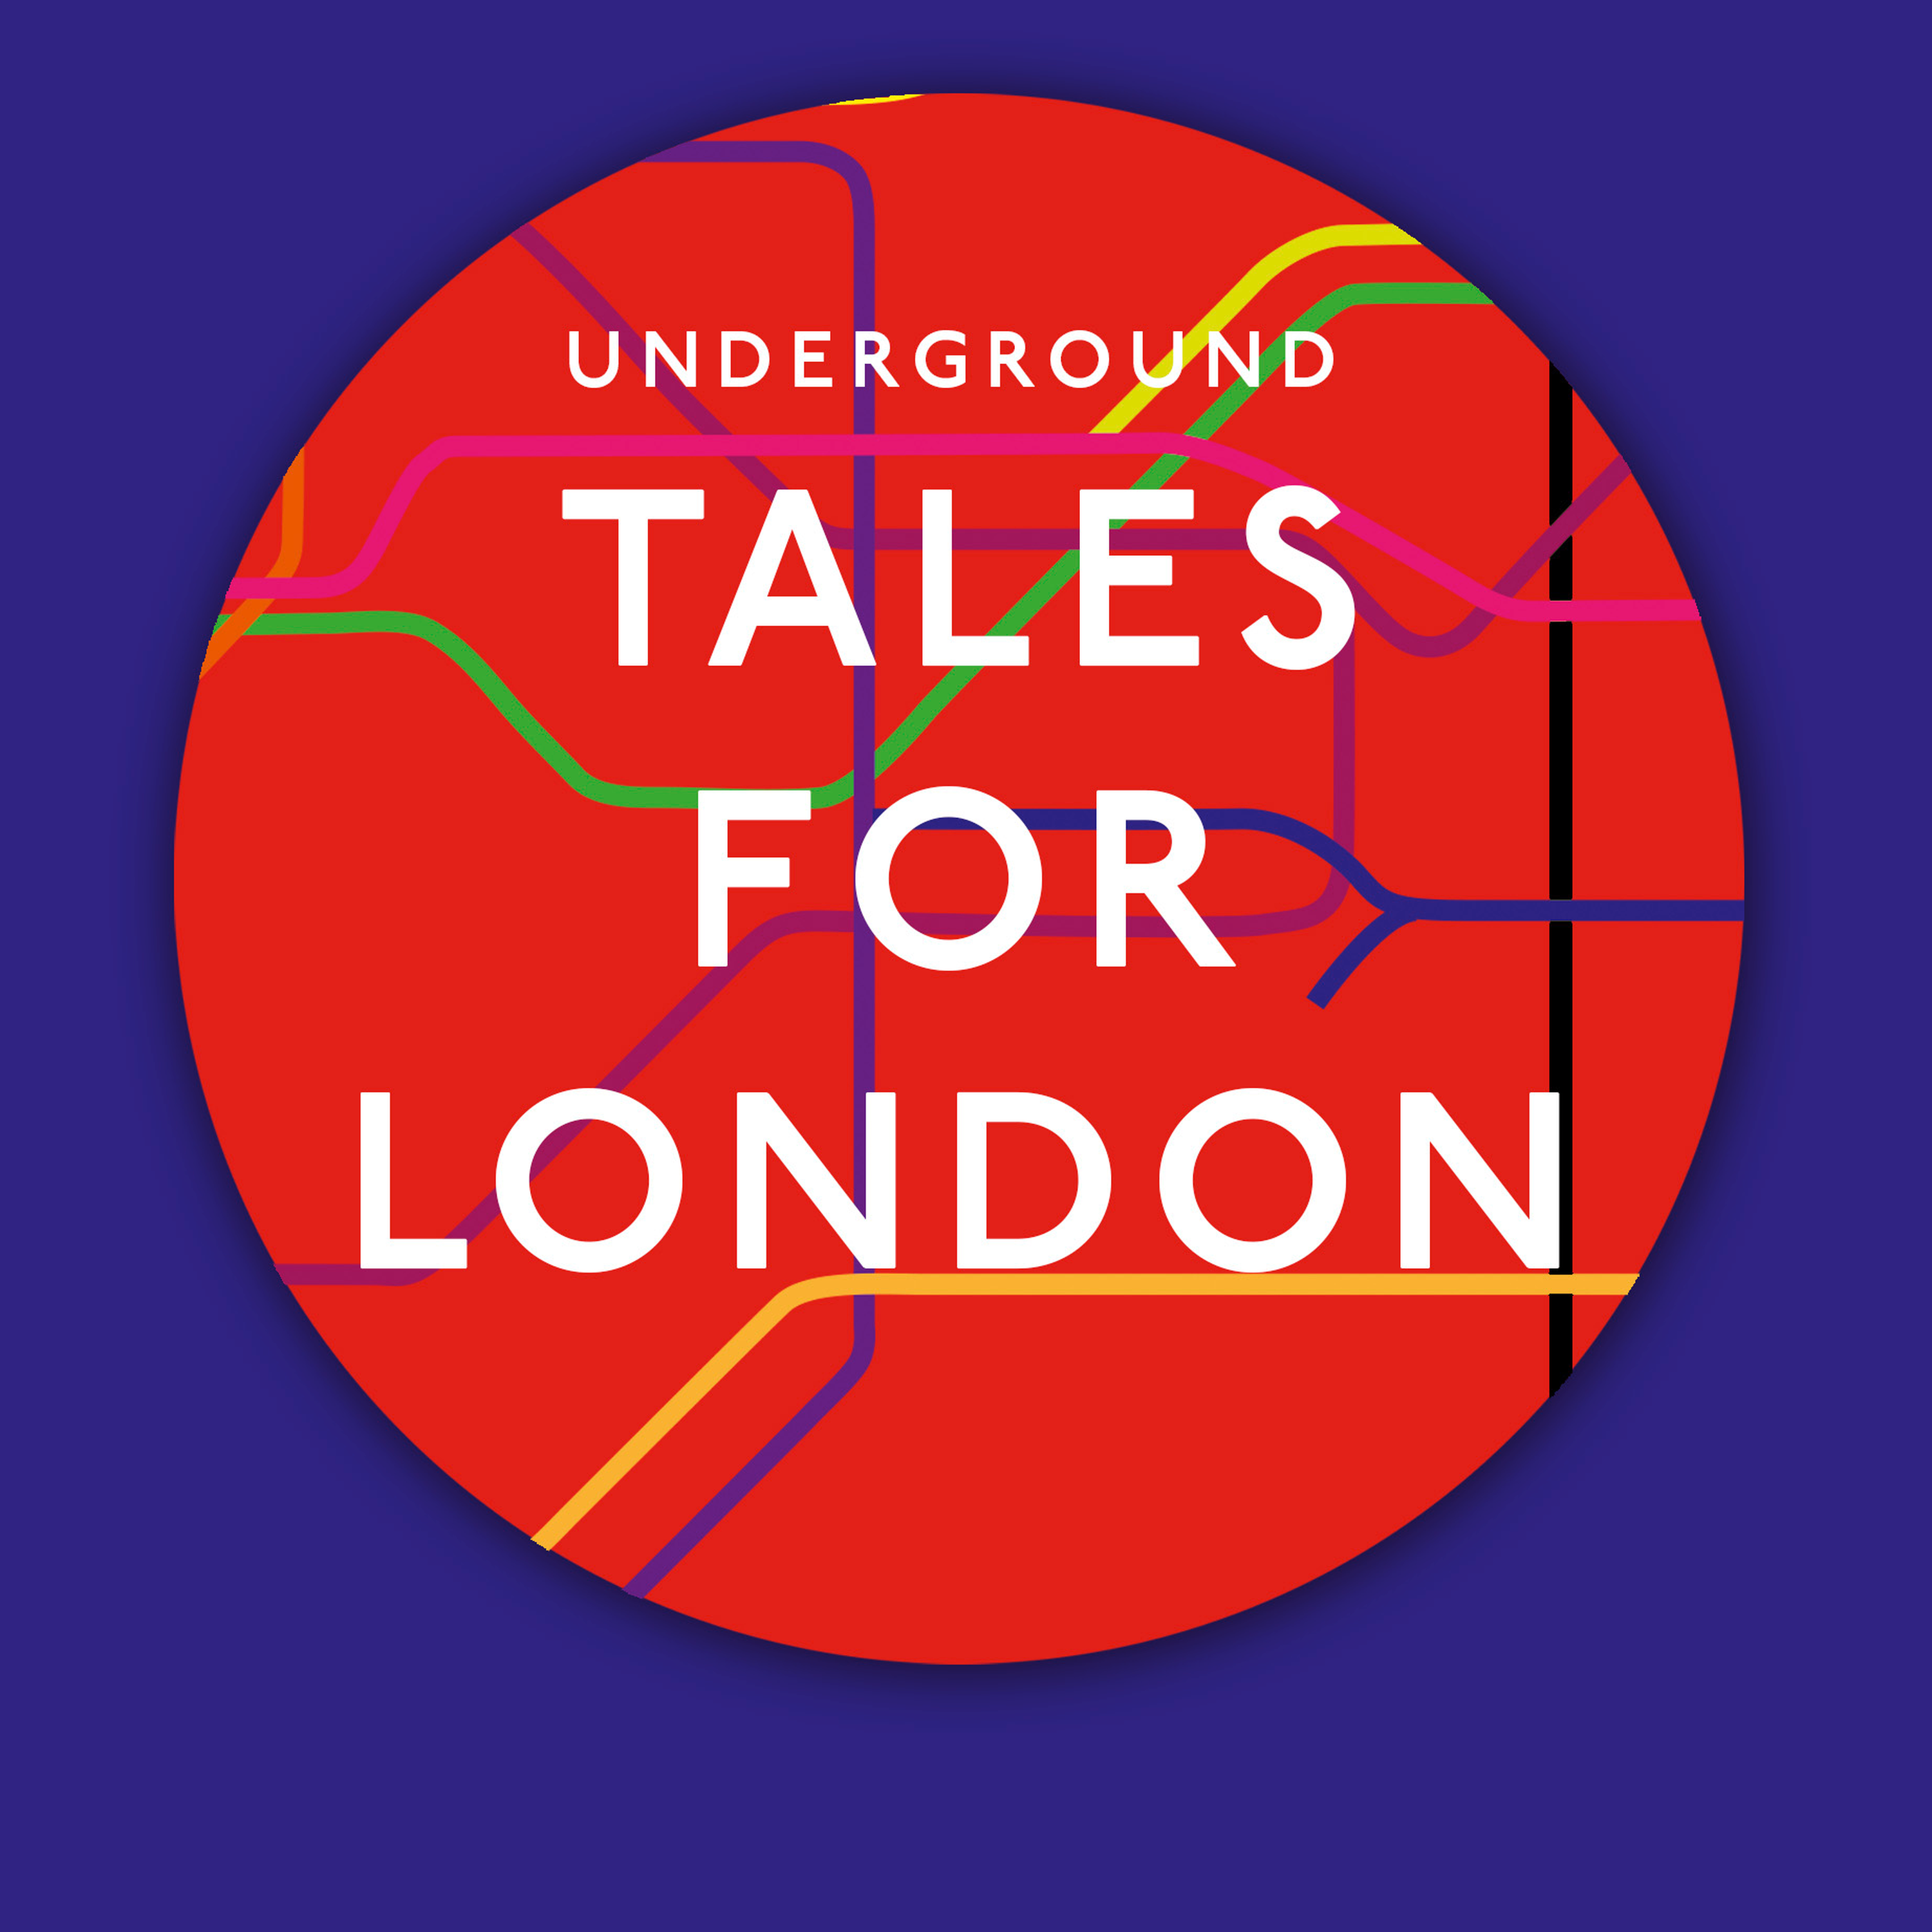 Thanks for listening to Tales for London...